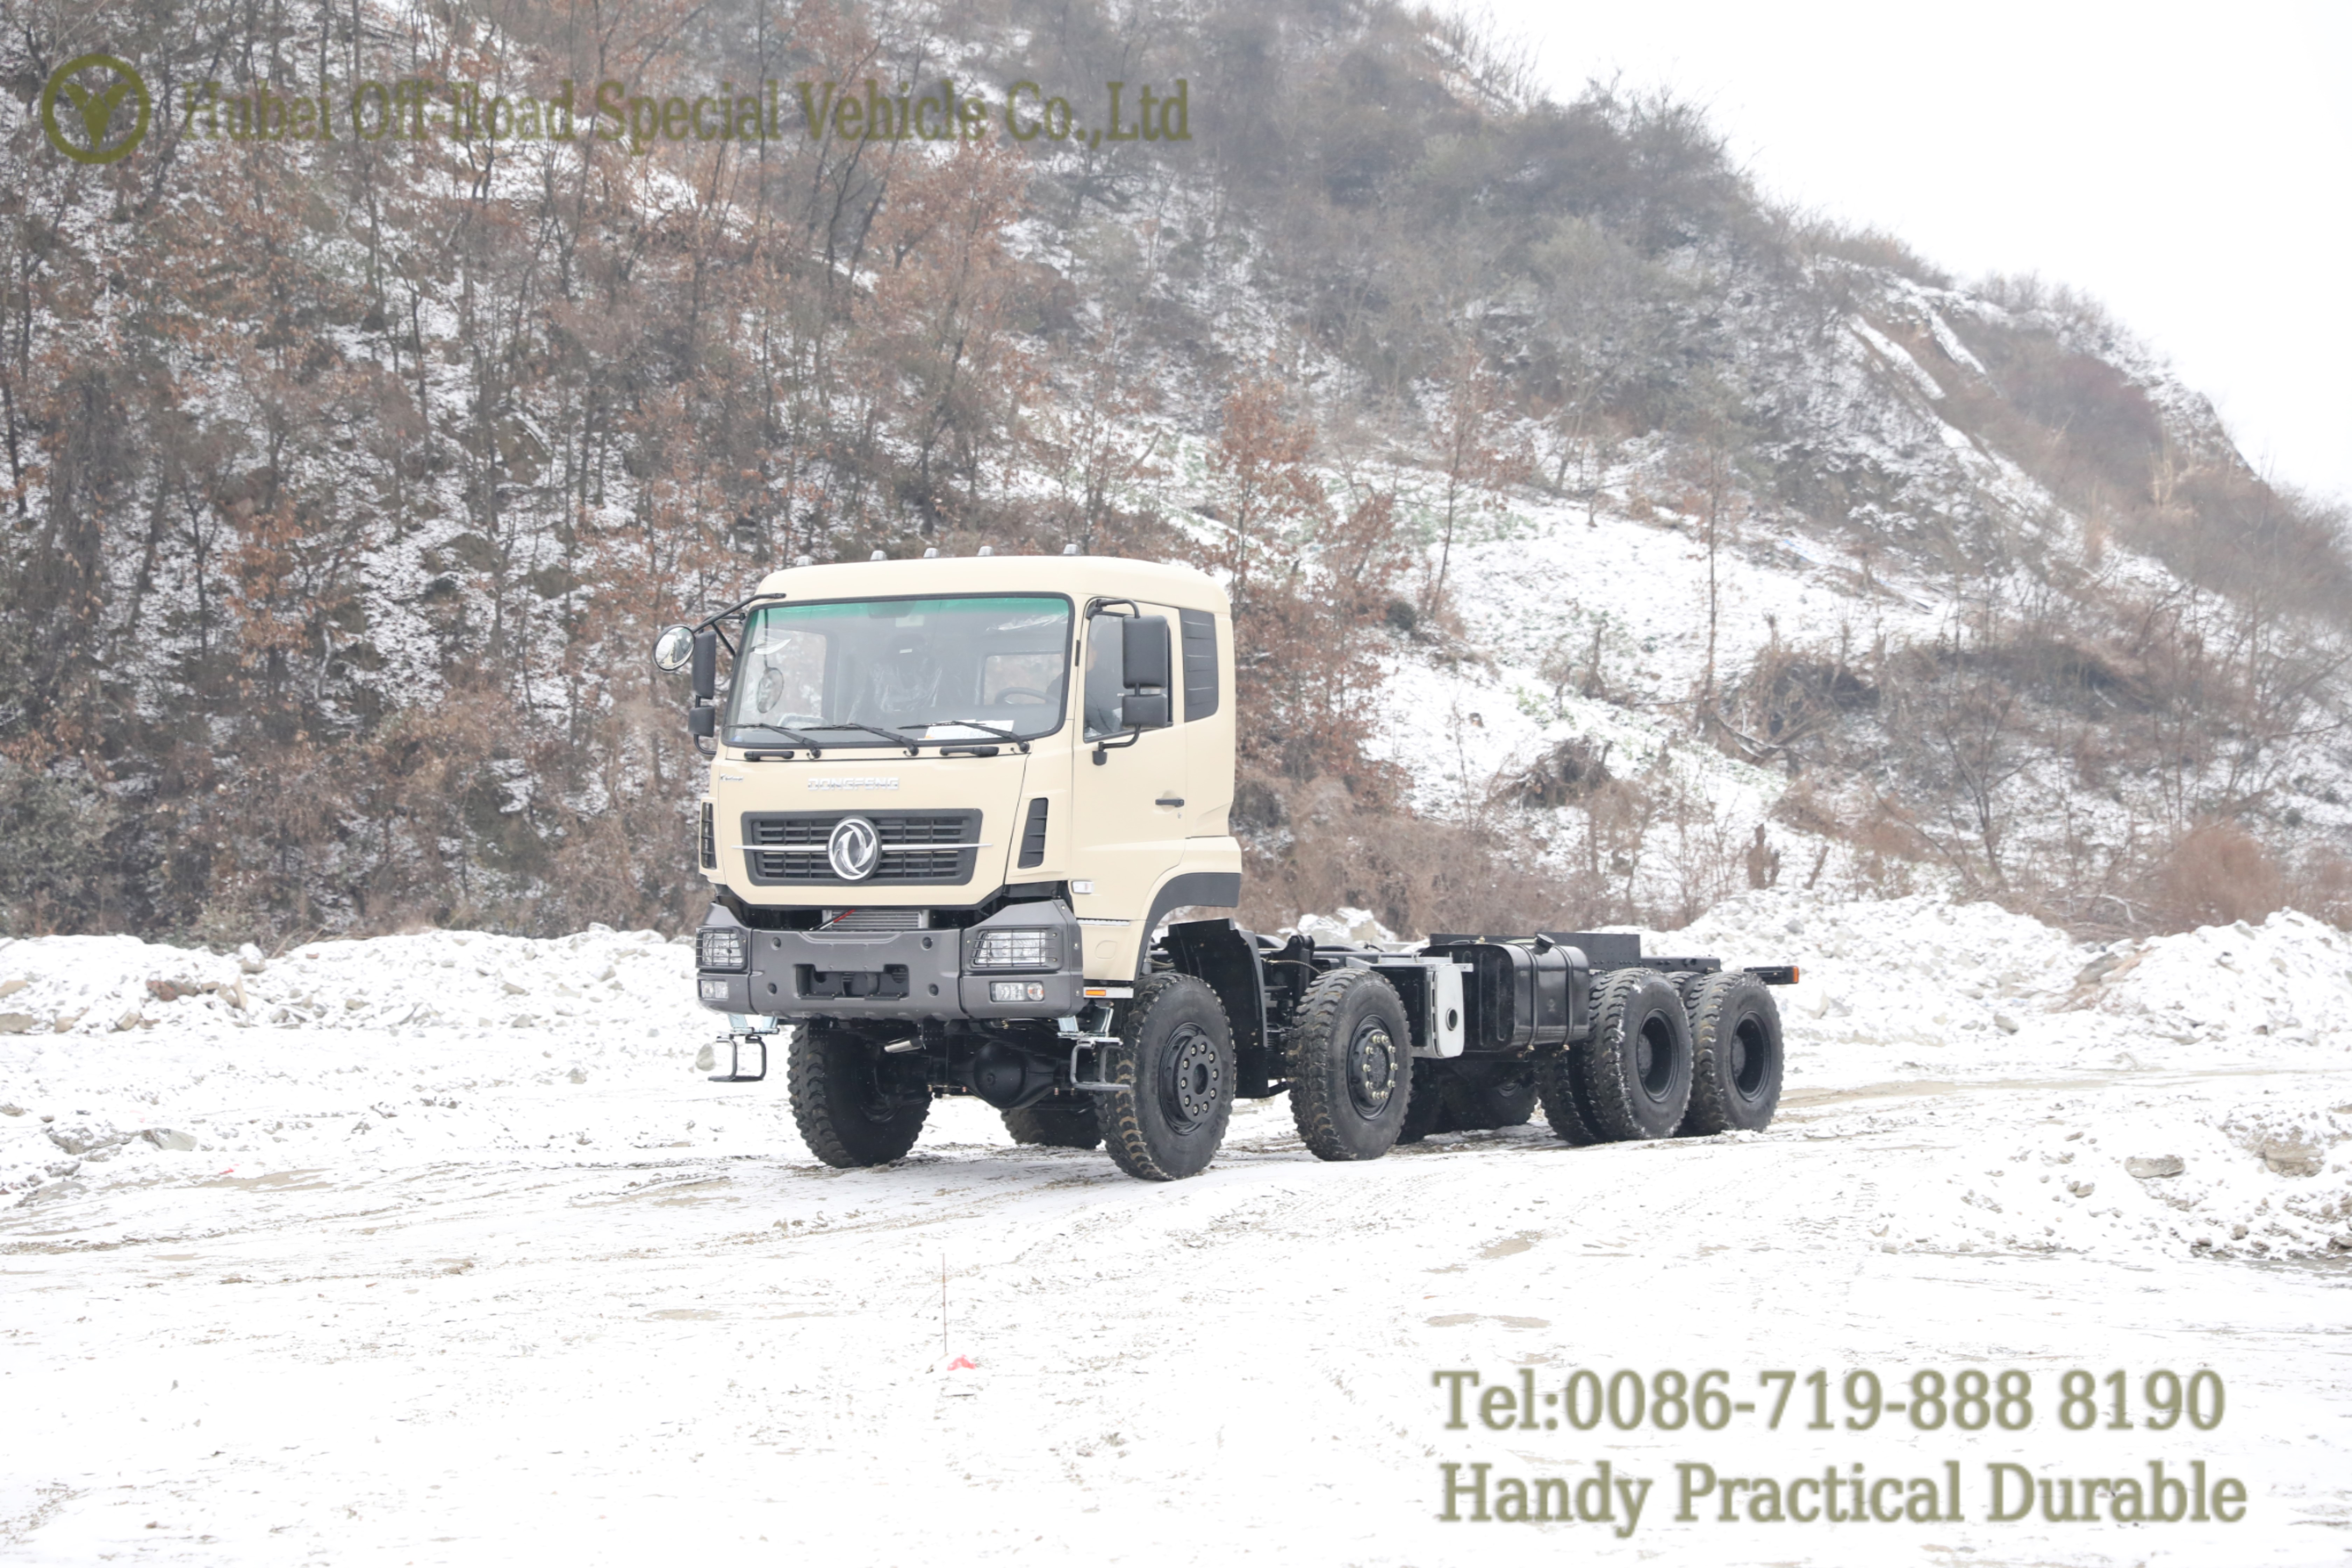 Dongfeng 8×8 All-wheel Drive Chassis Off The Production Line